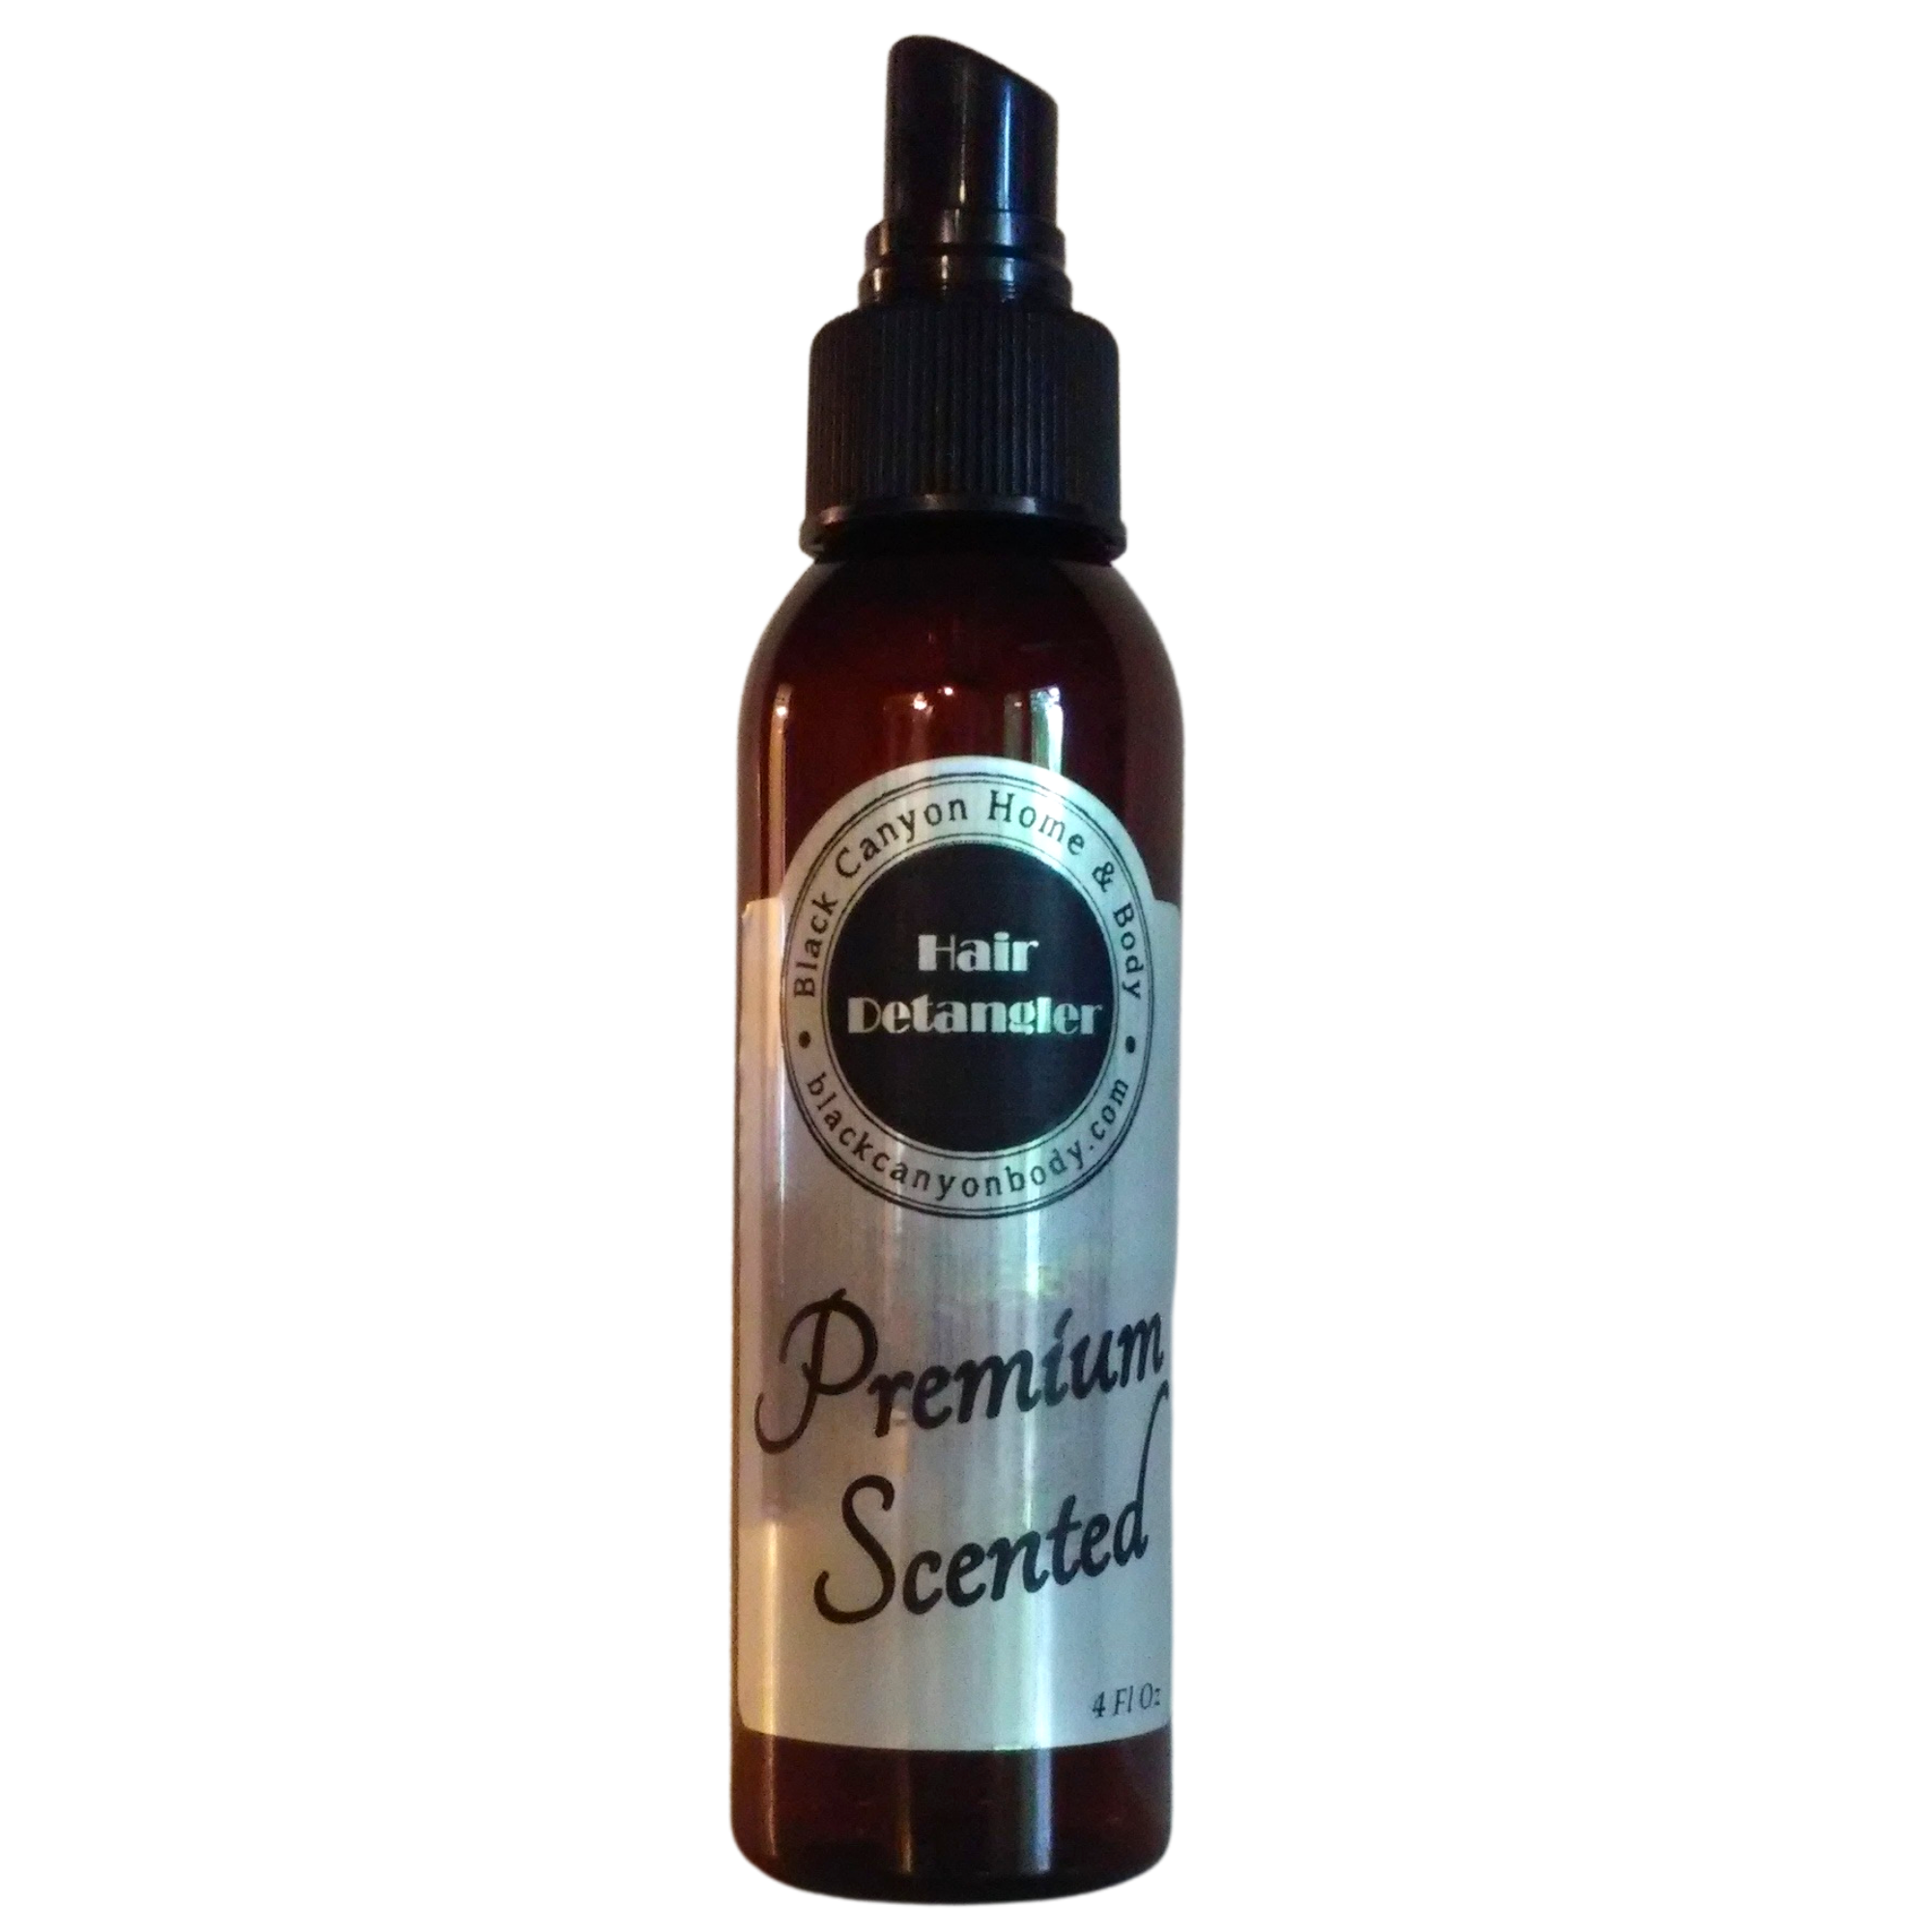 Black Canyon Gingerbread Spiced Cookie Scented Hair Detangler Spray with Olive Oil